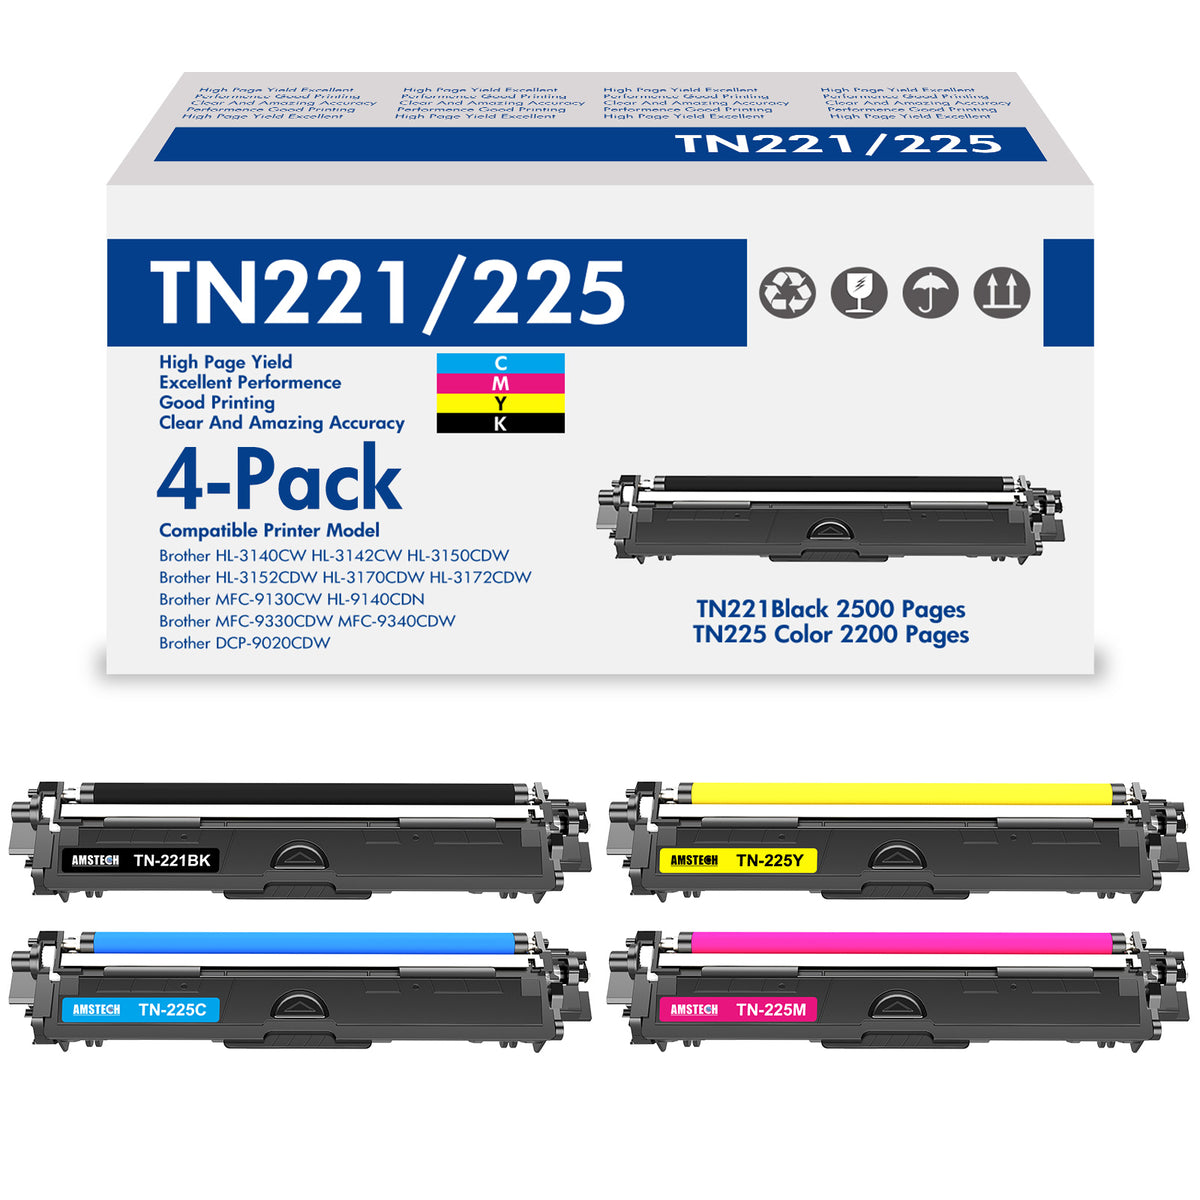 Brother DCP Series (Laser) Toner DCP 9020cdw - Fast Delivery Buy Now